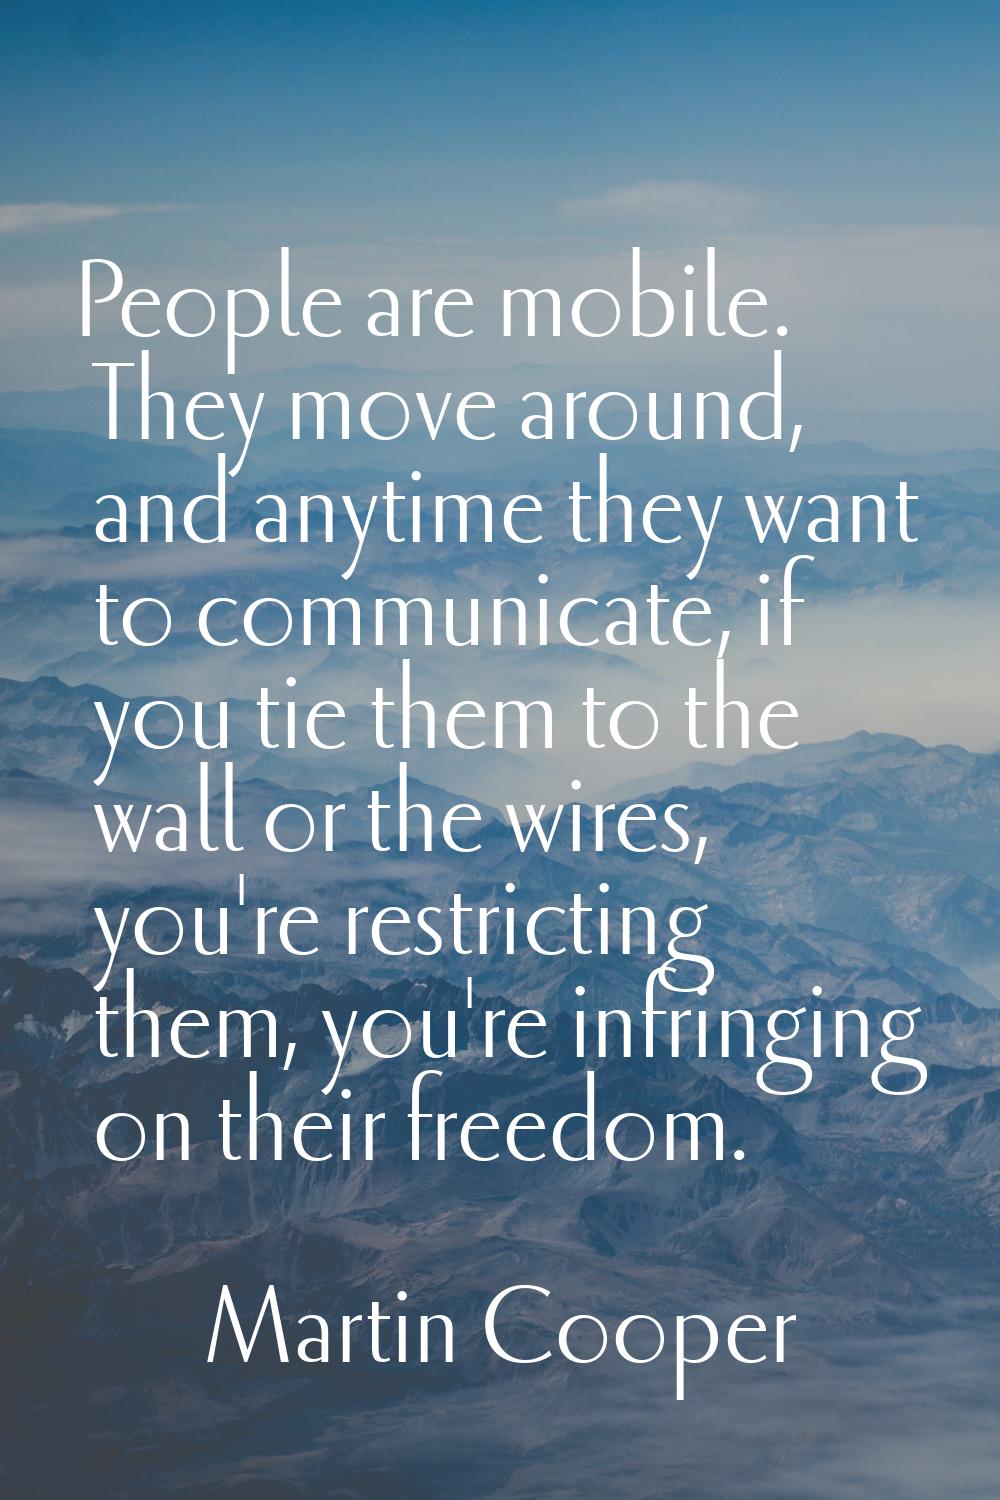 People are mobile. They move around, and anytime they want to communicate, if you tie them to the w